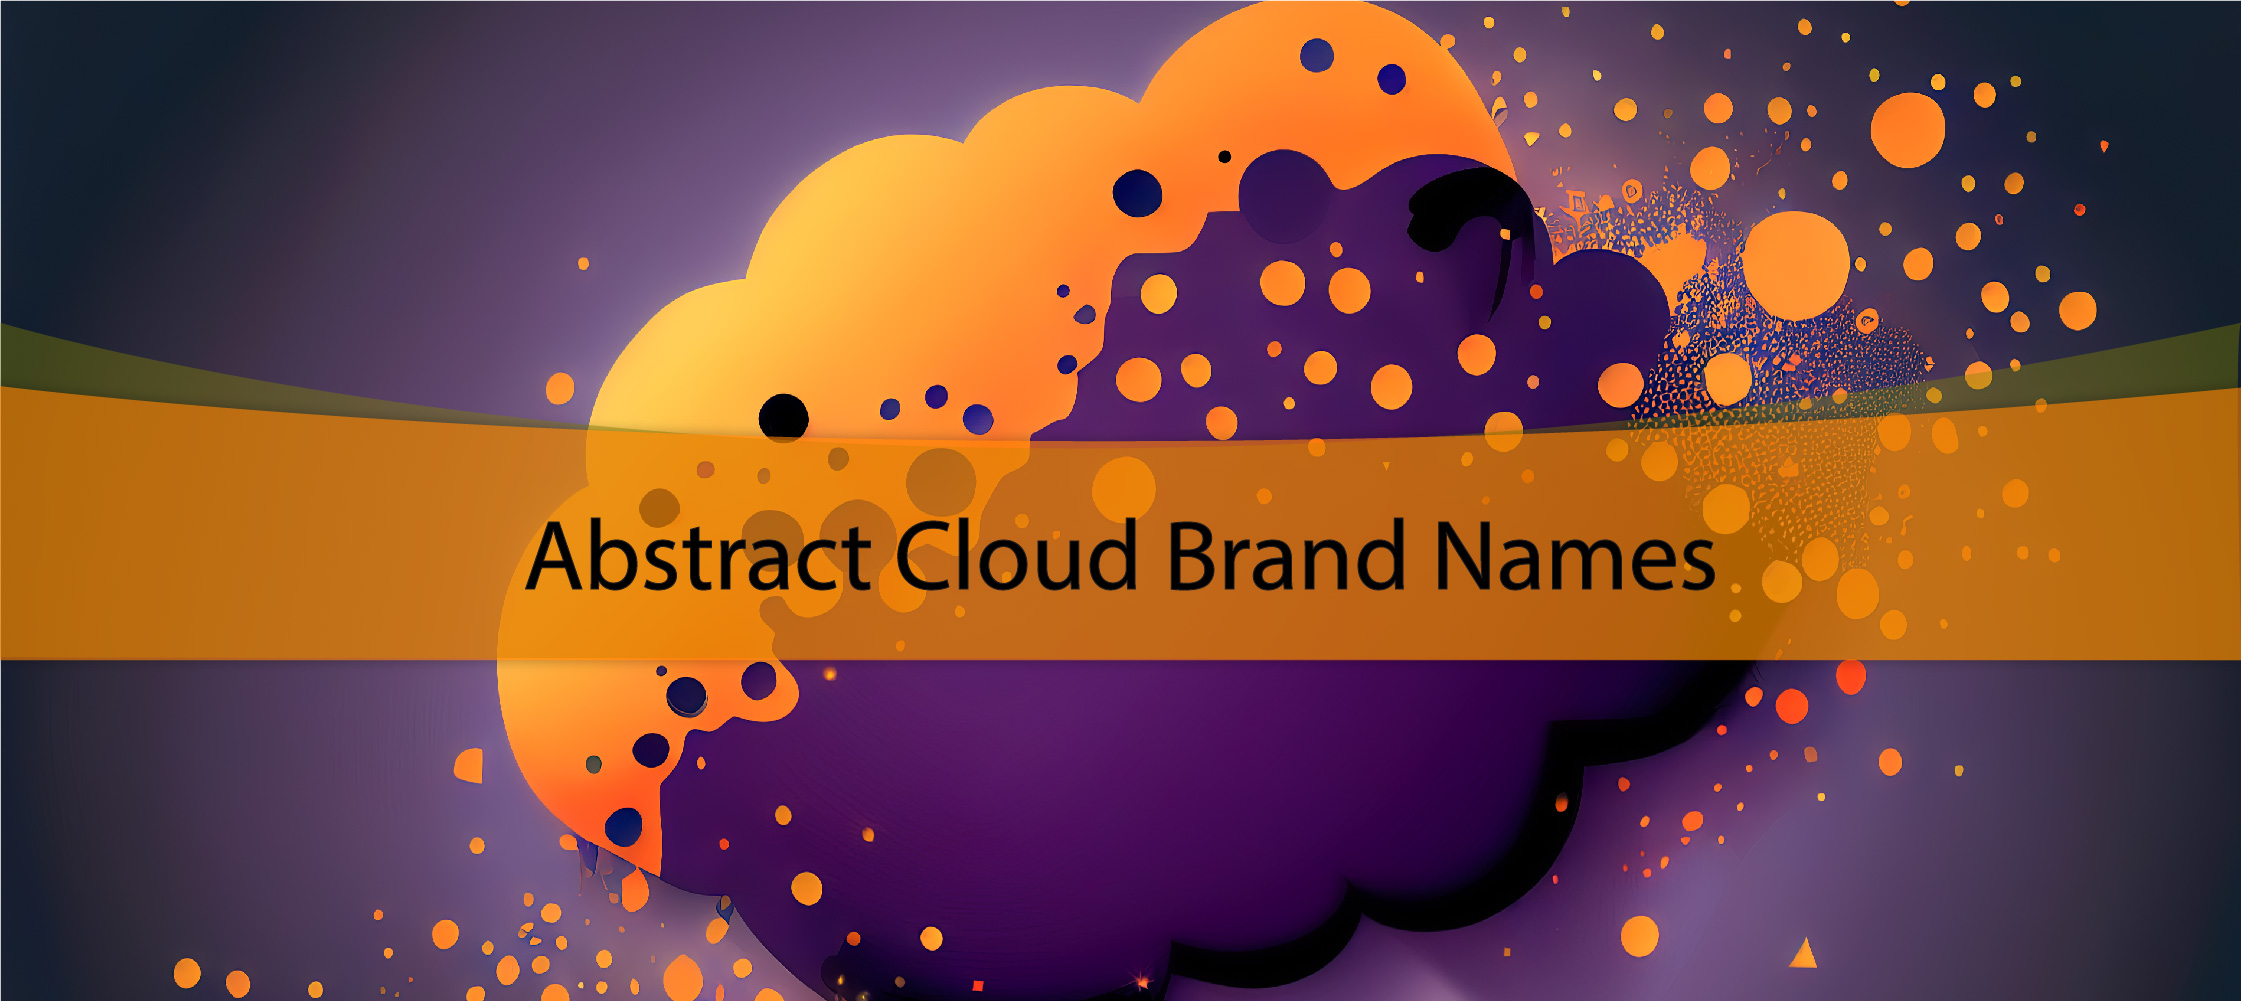 Abstract Cloud Brand Names